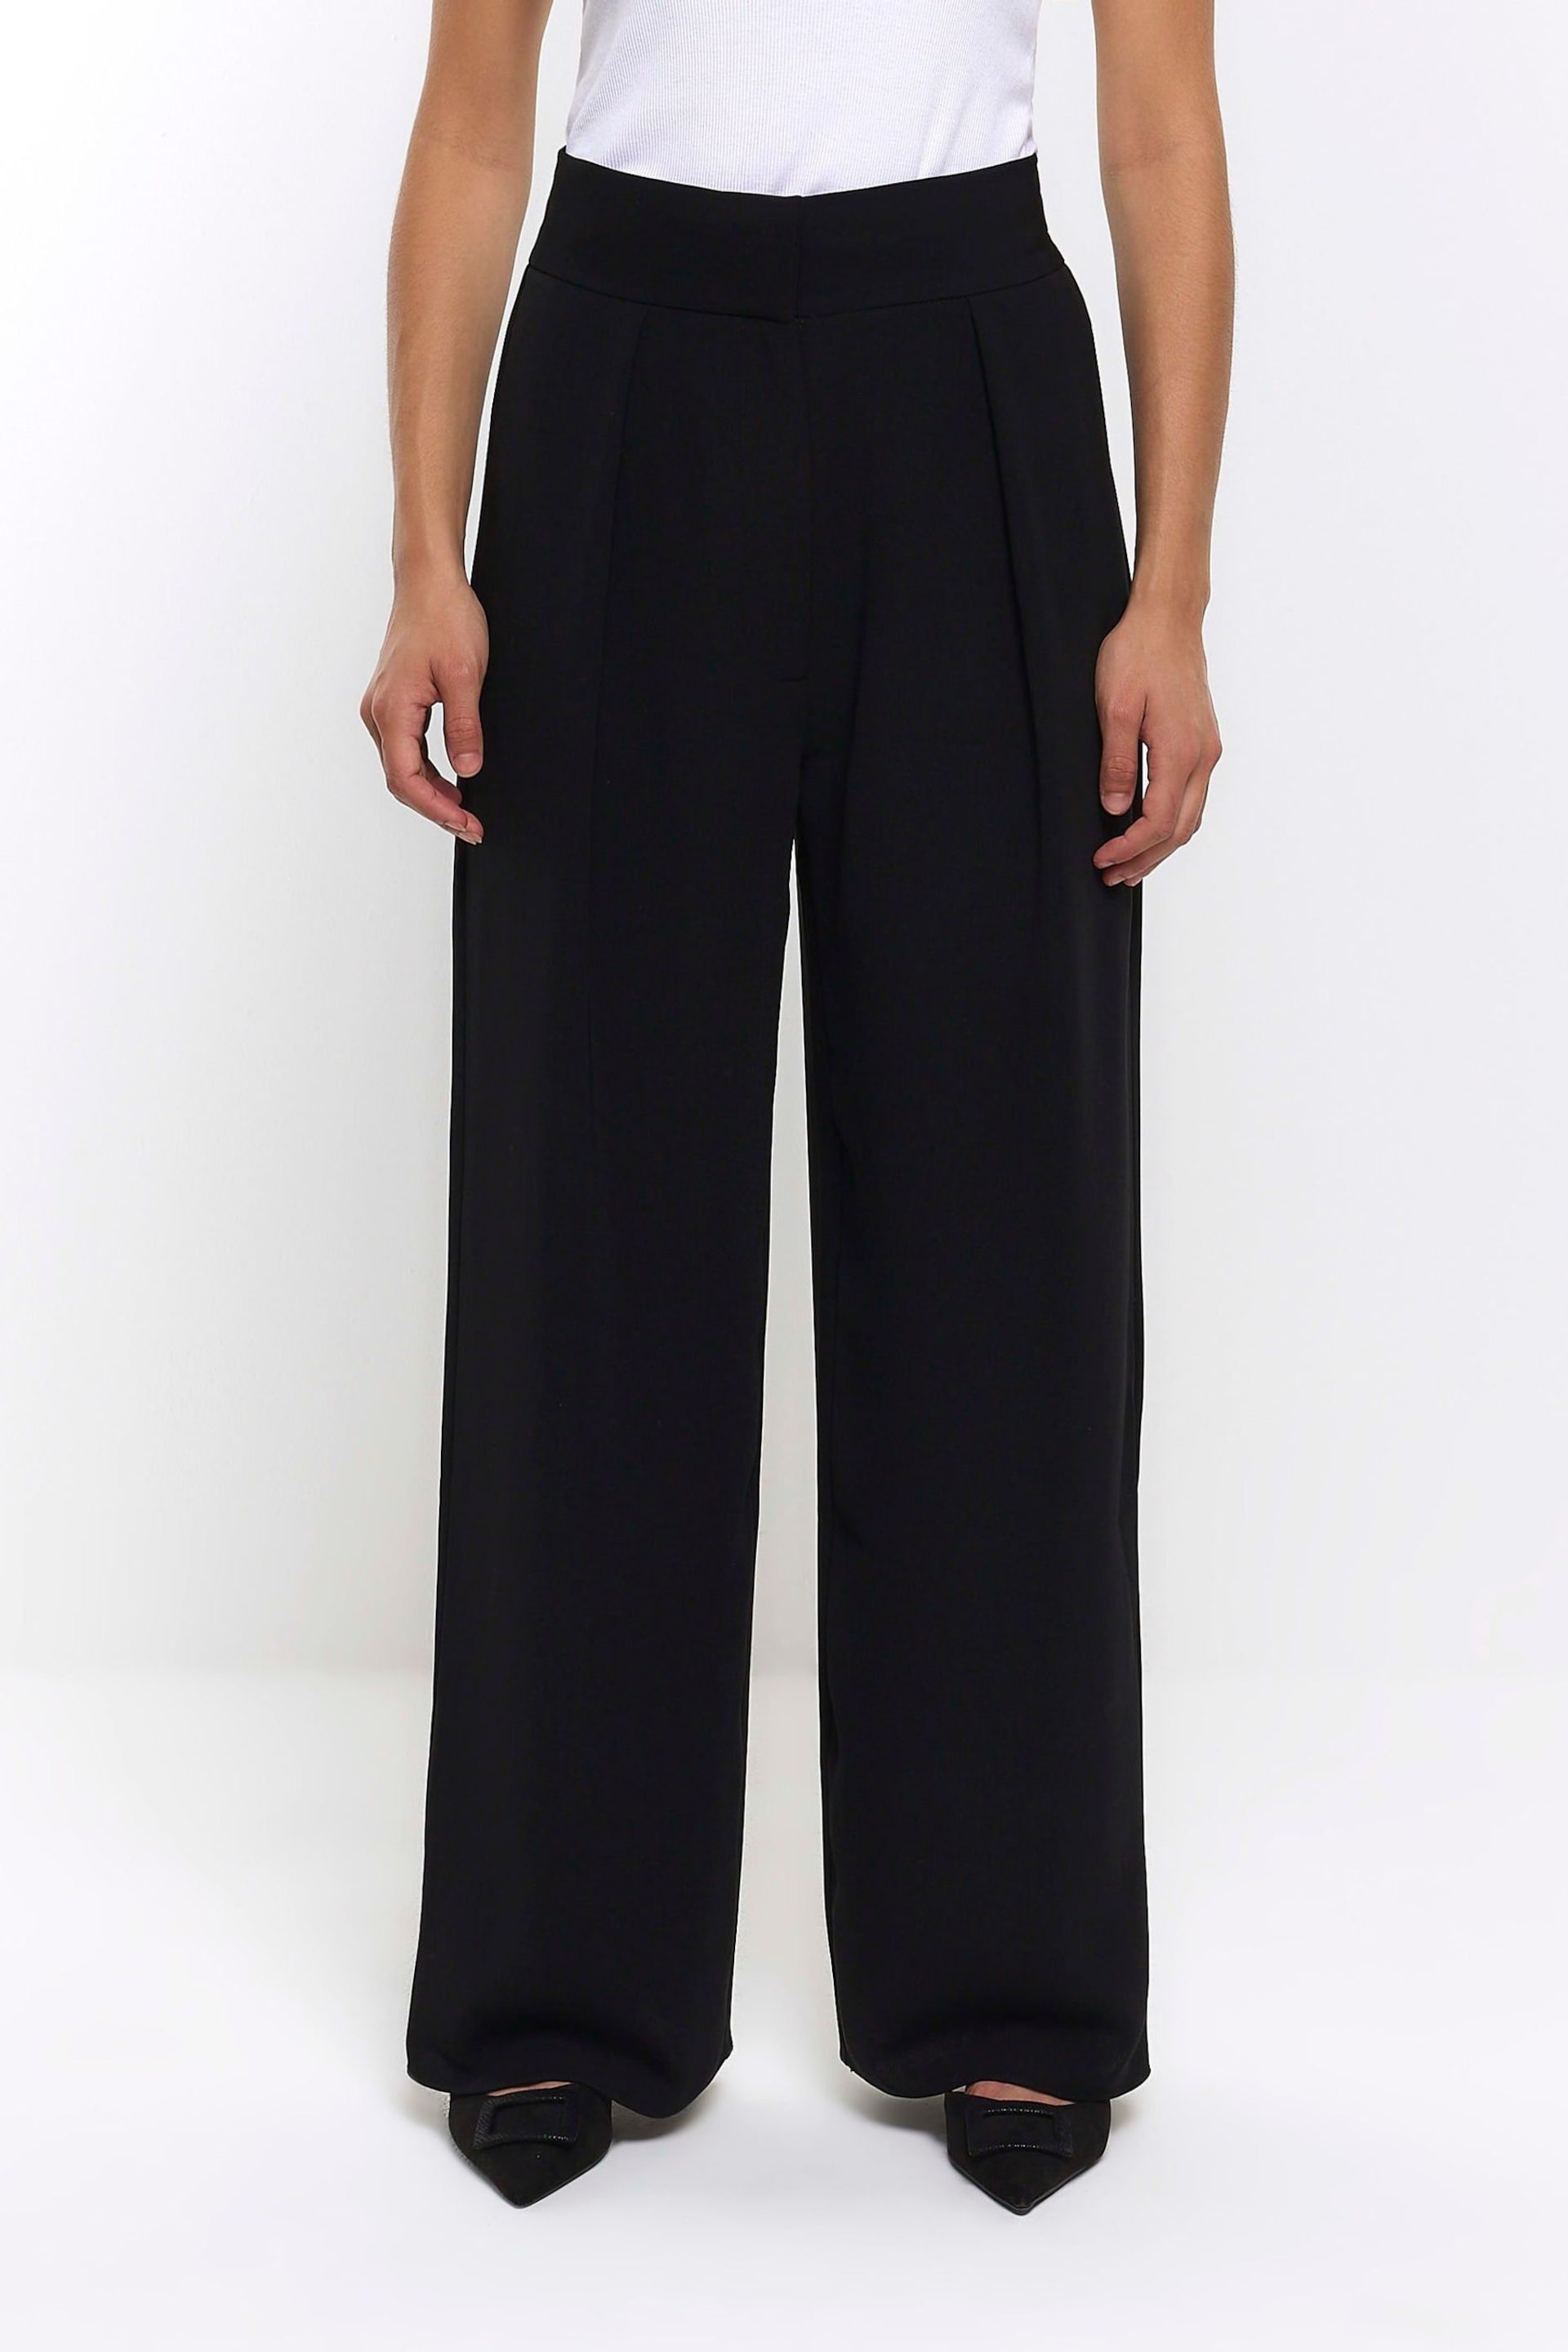 River Island Black Wide Leg Pleated Trousers - Image 4 of 5